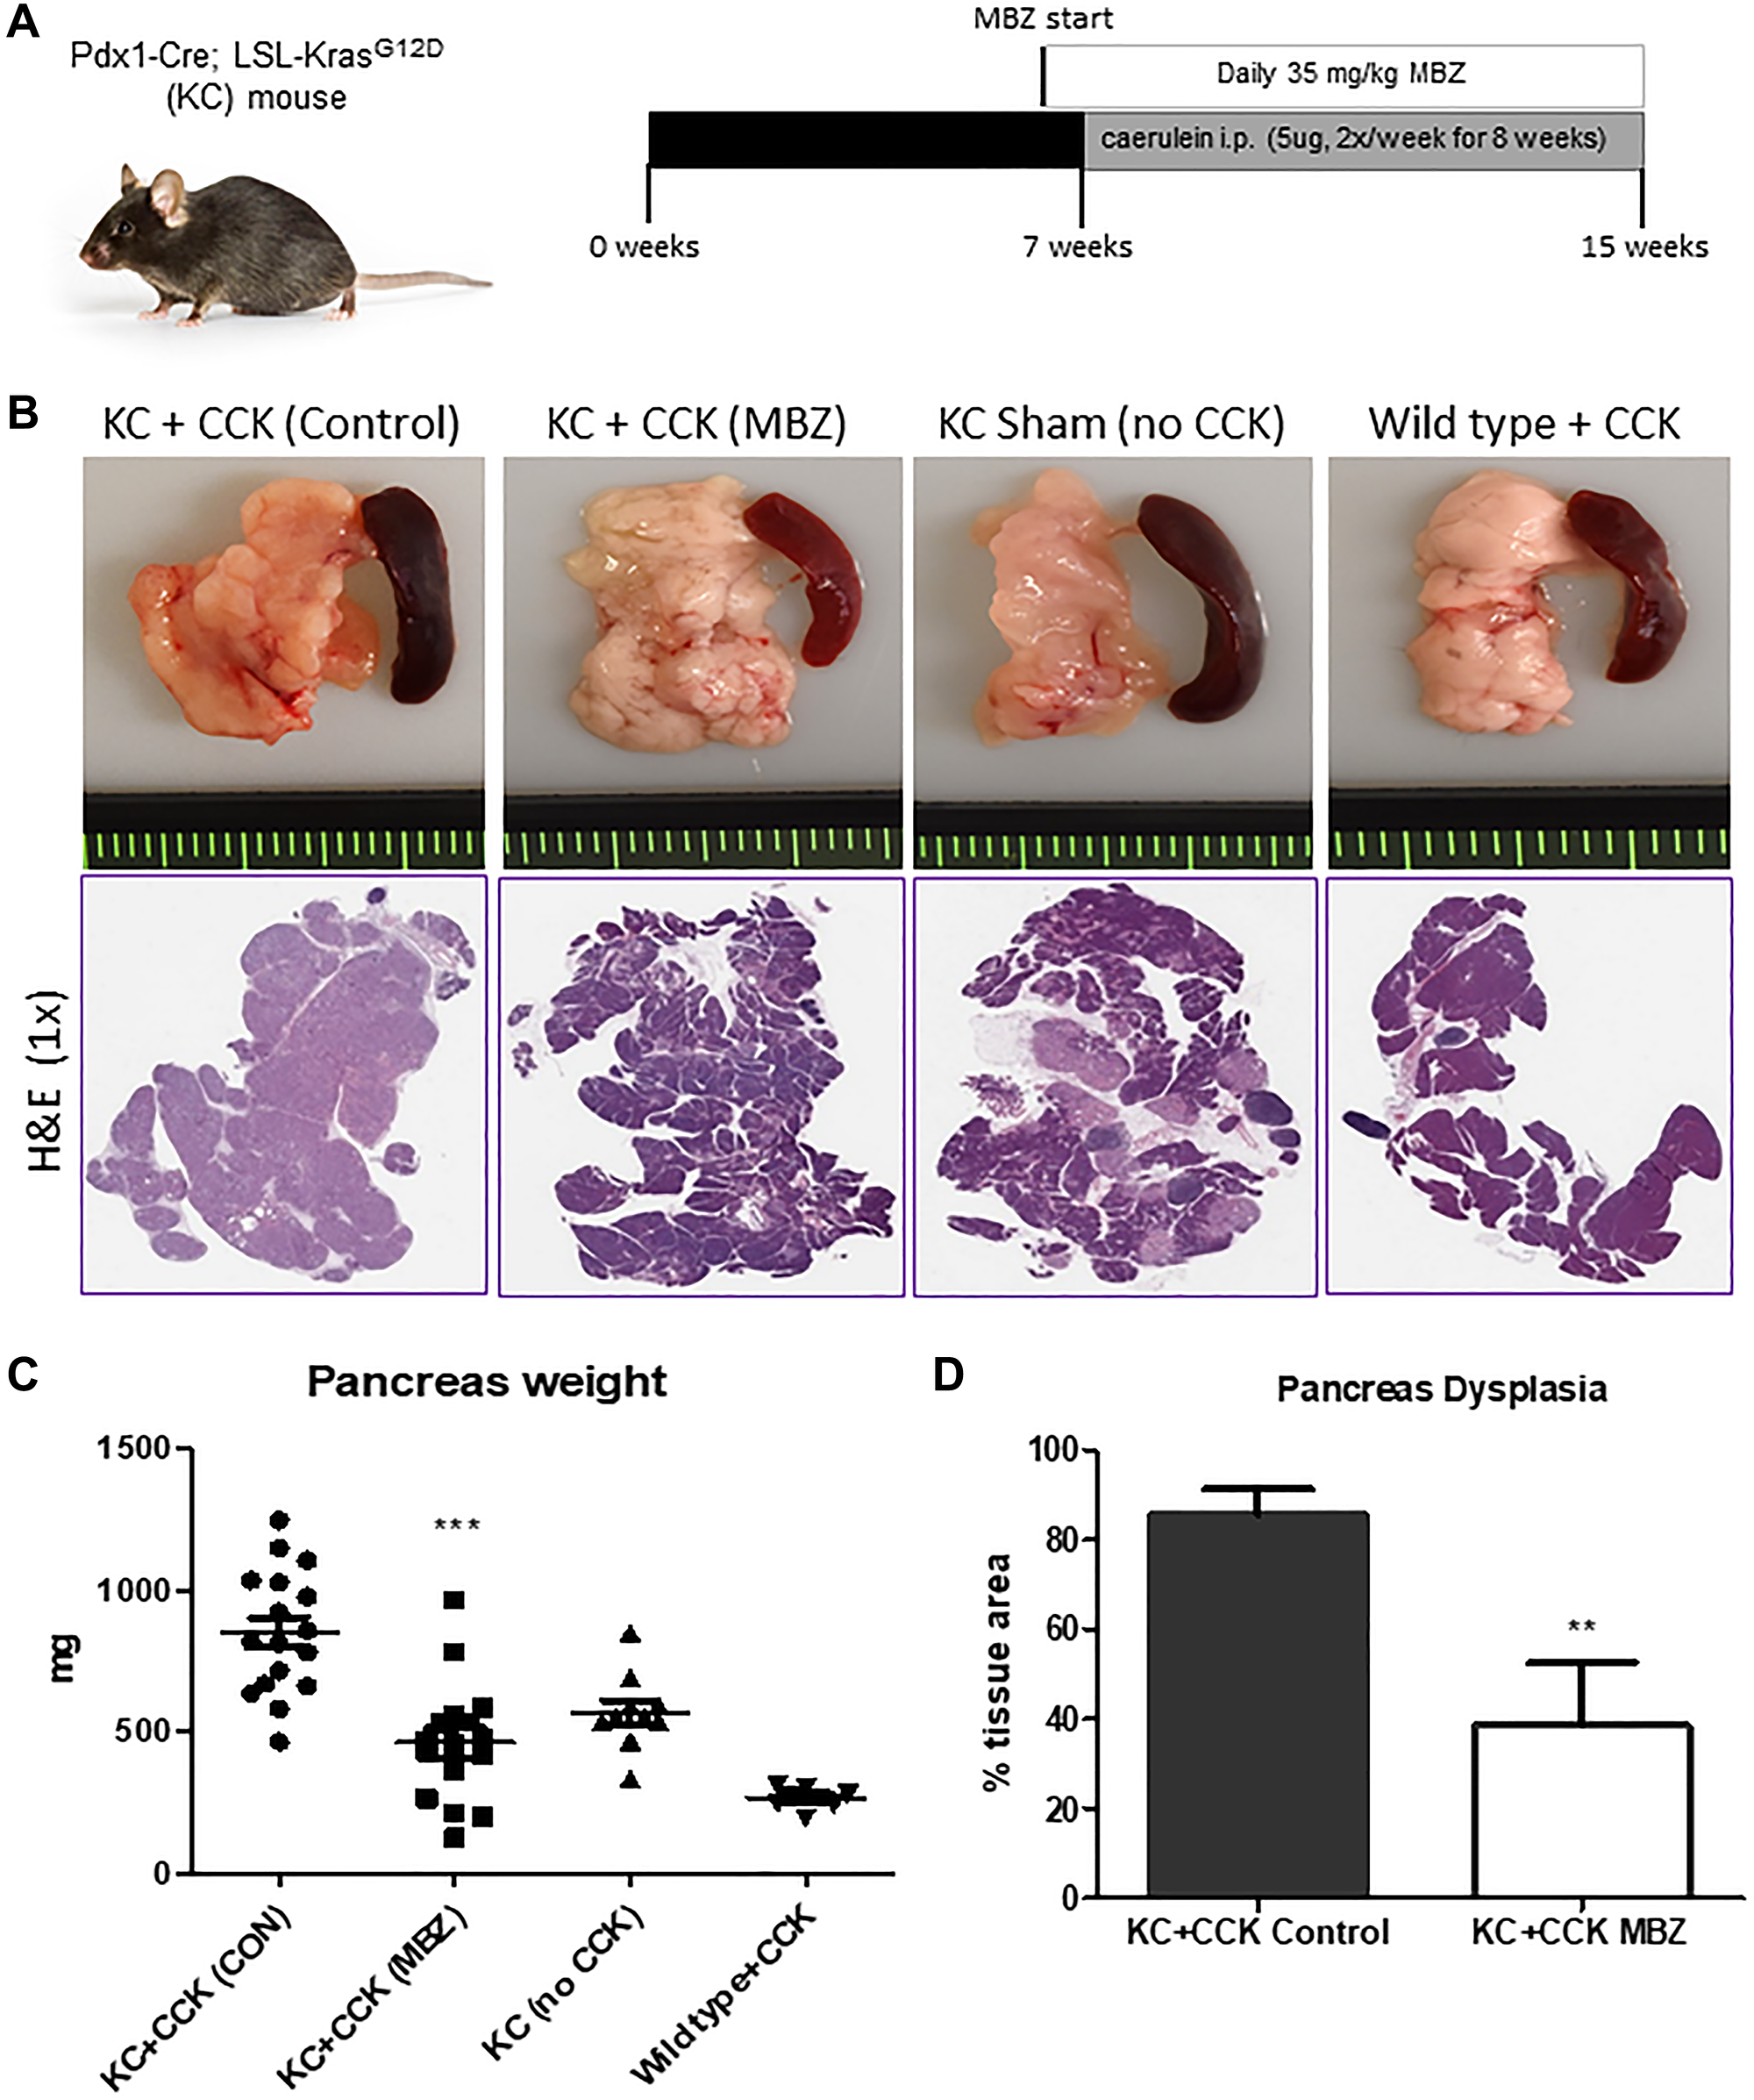 Mebendazole suppressed Kras-mediated, cearulein-induced tumorigenesis in the KC mouse model of pancreatitis.